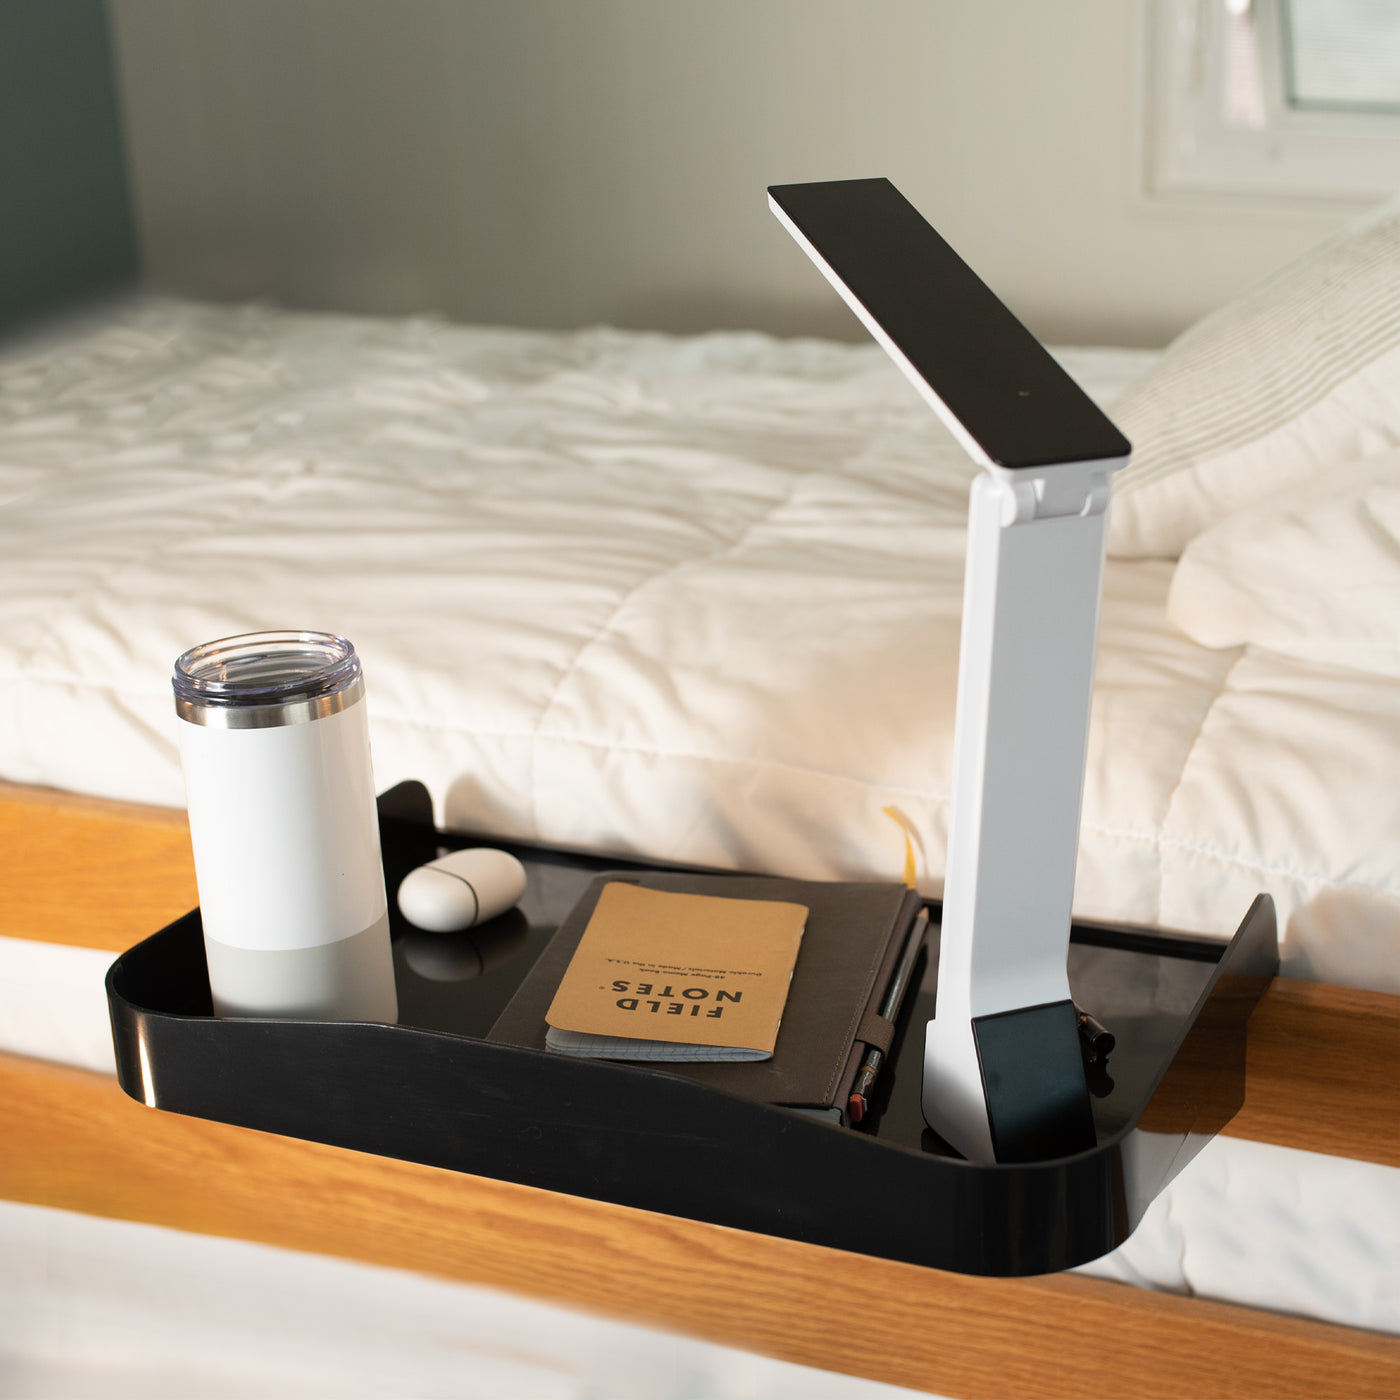 Attachable bedside shelf nightstand tray for storage and organizing.